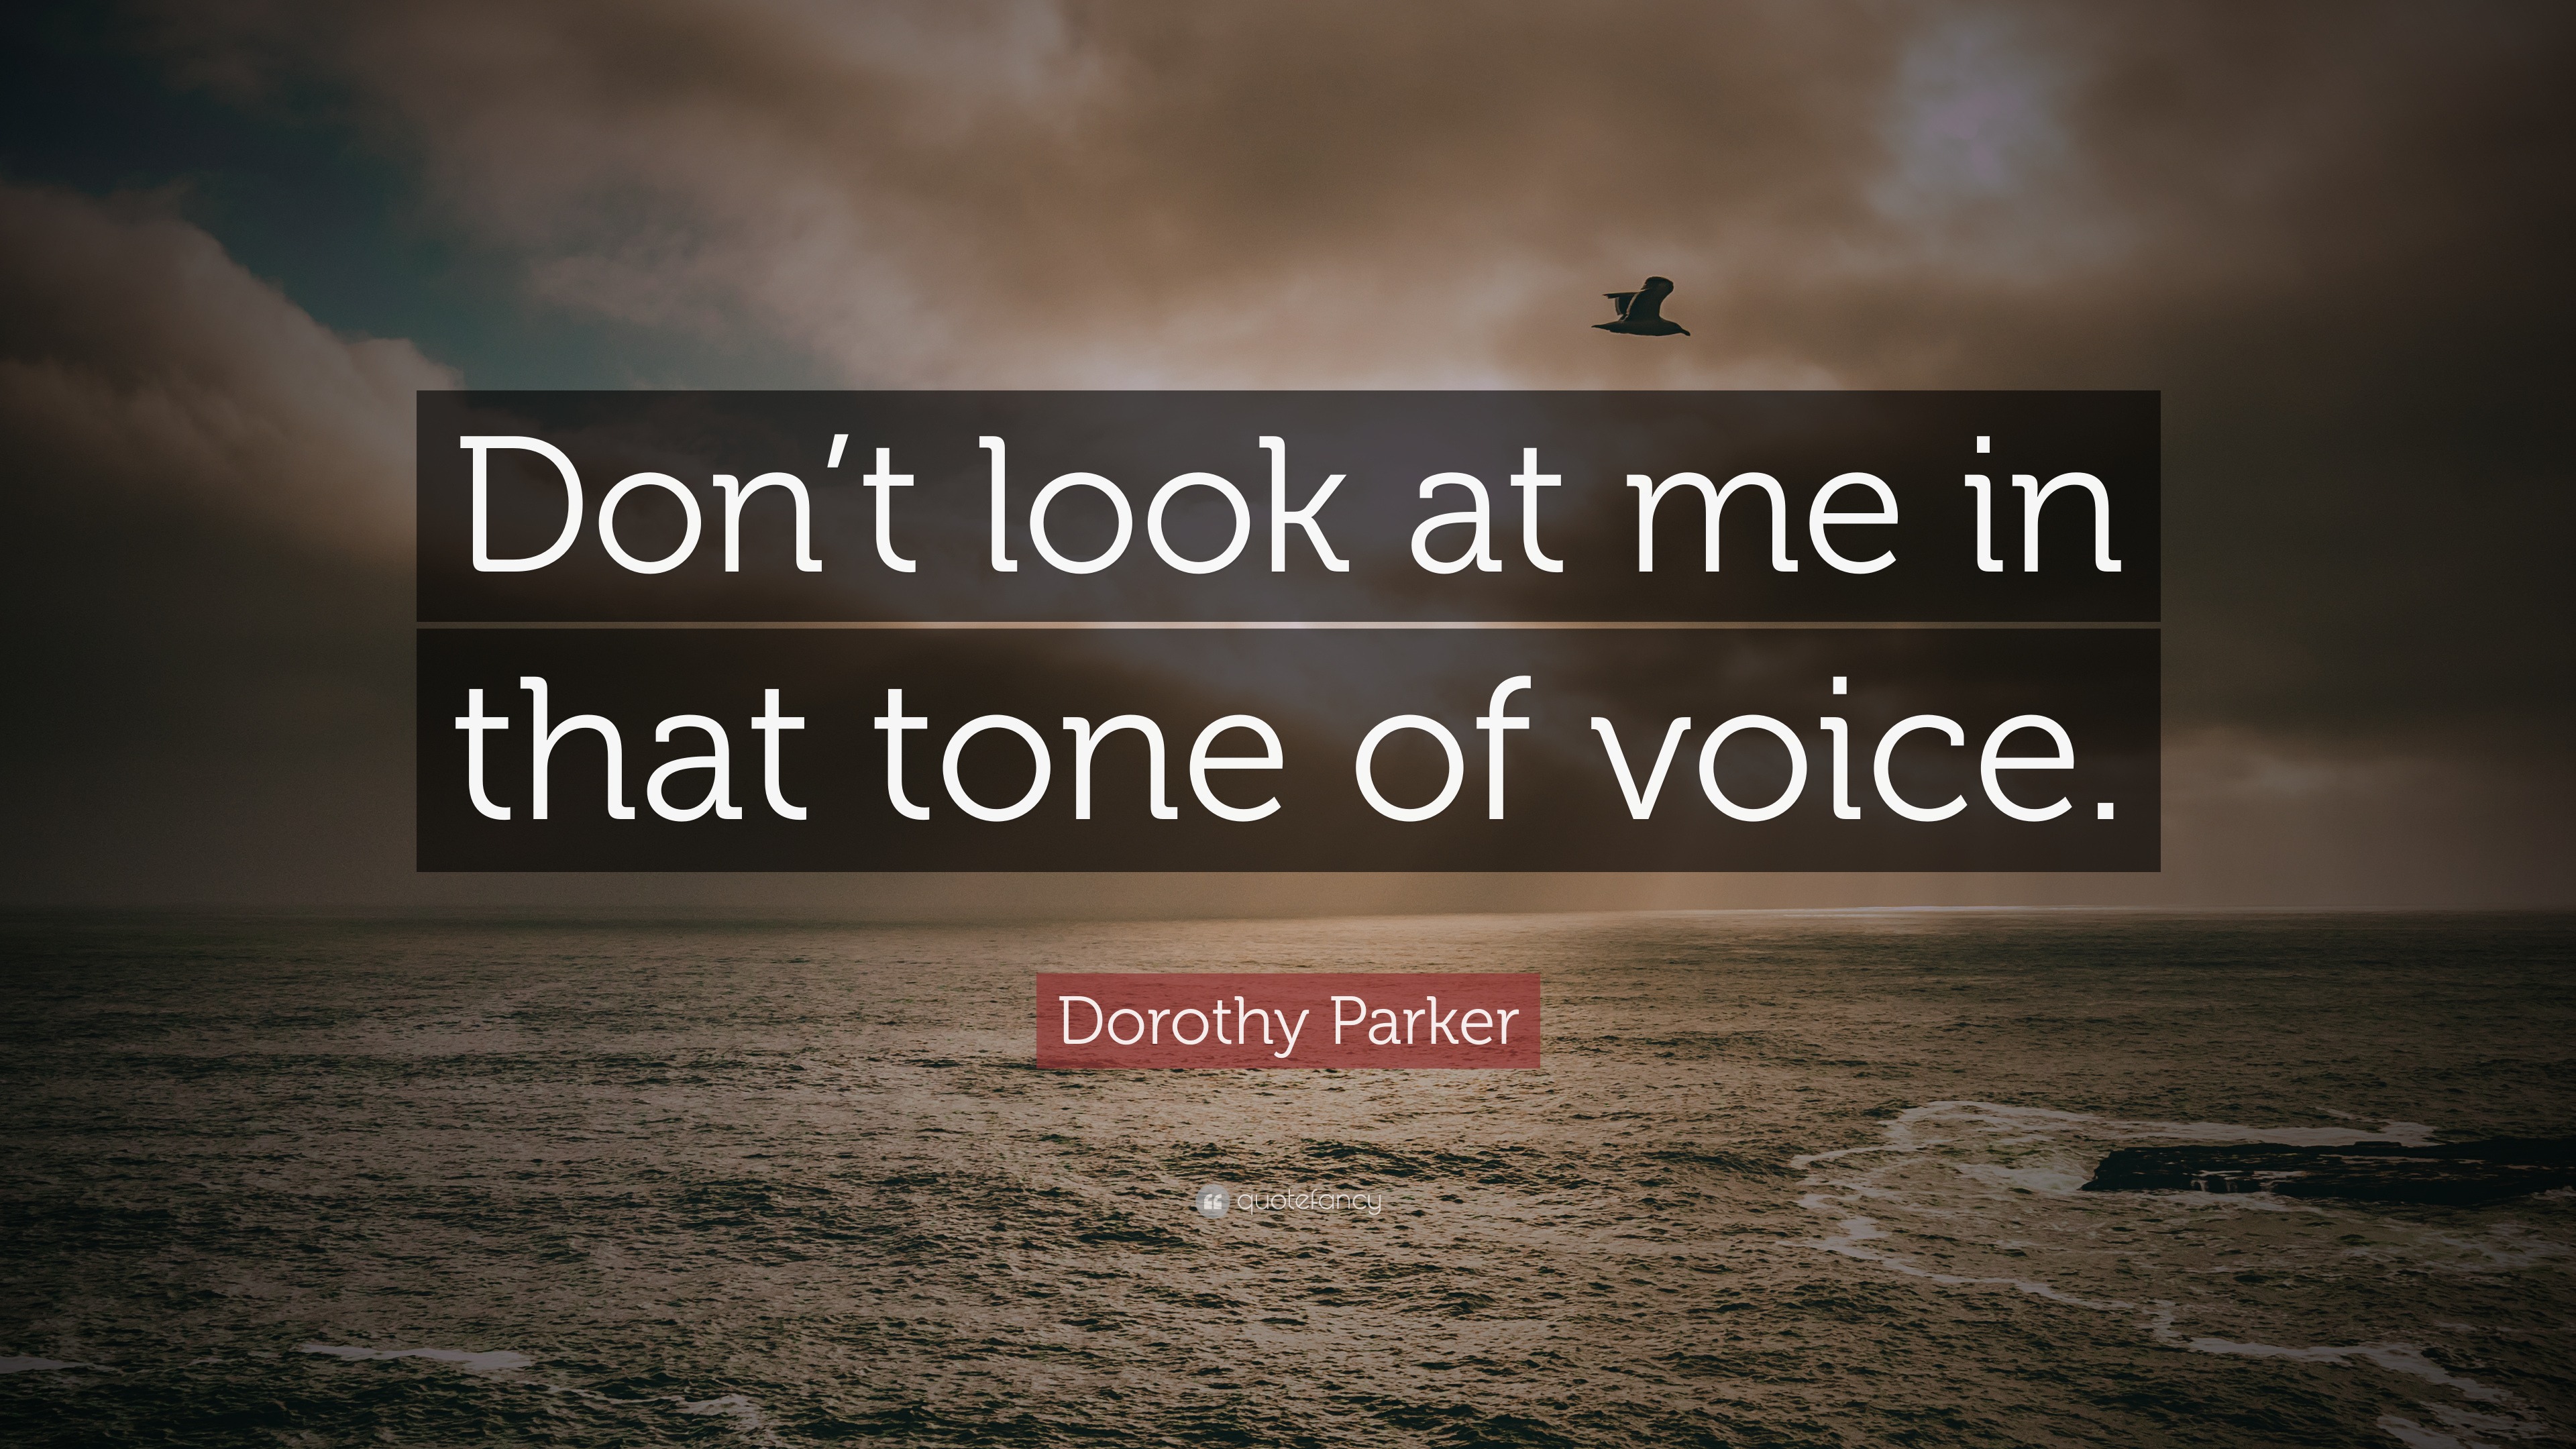 Dorothy Parker Quote: "Don't look at me in that tone of voice." (9 wallpapers) - Quotefancy